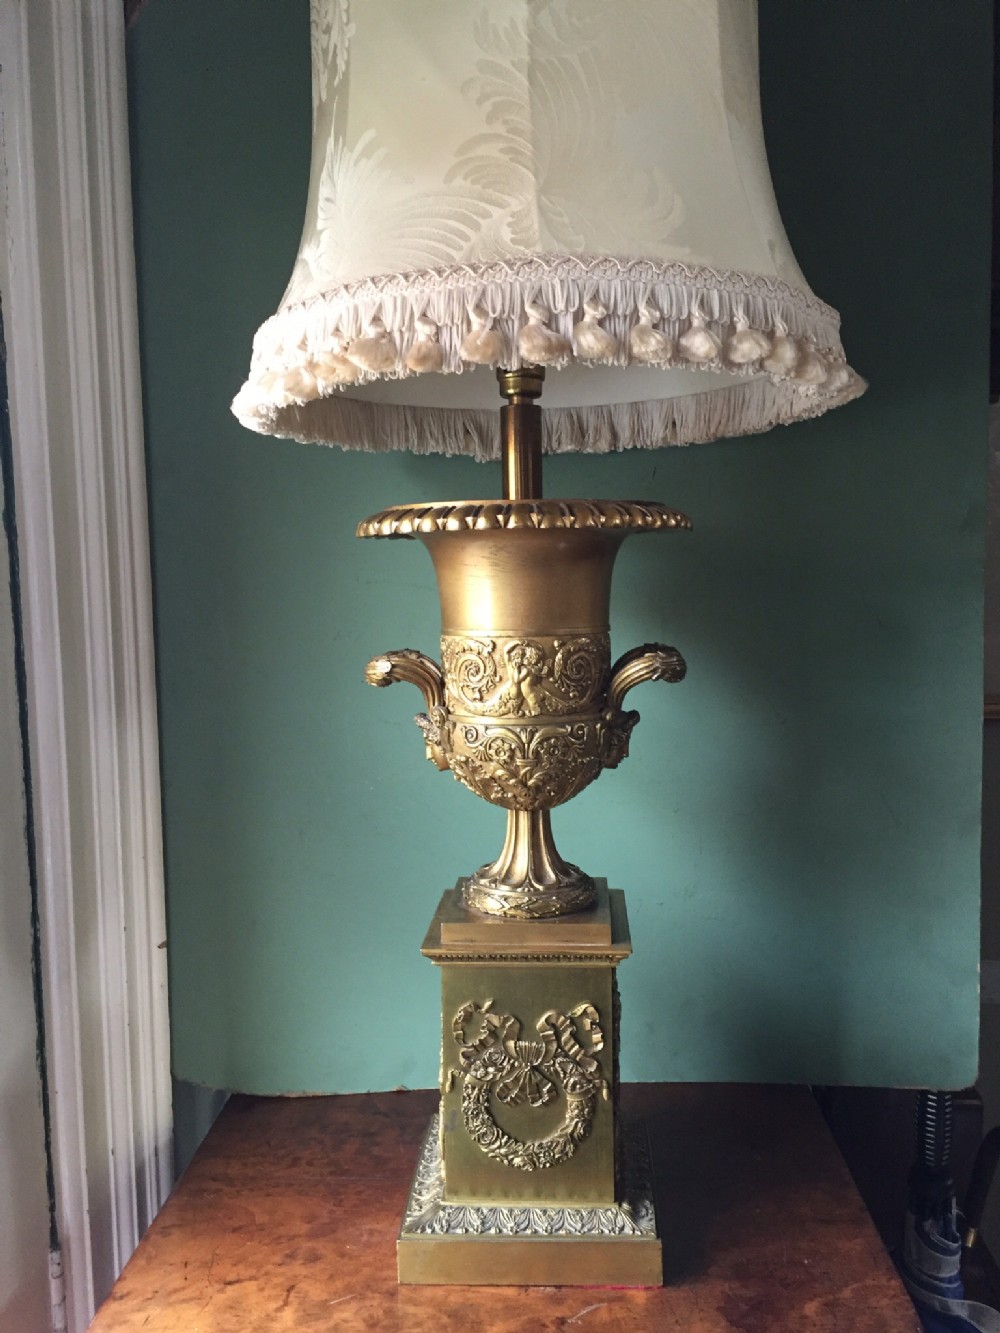 late c19th gilded ormolubronze empire style table lamp